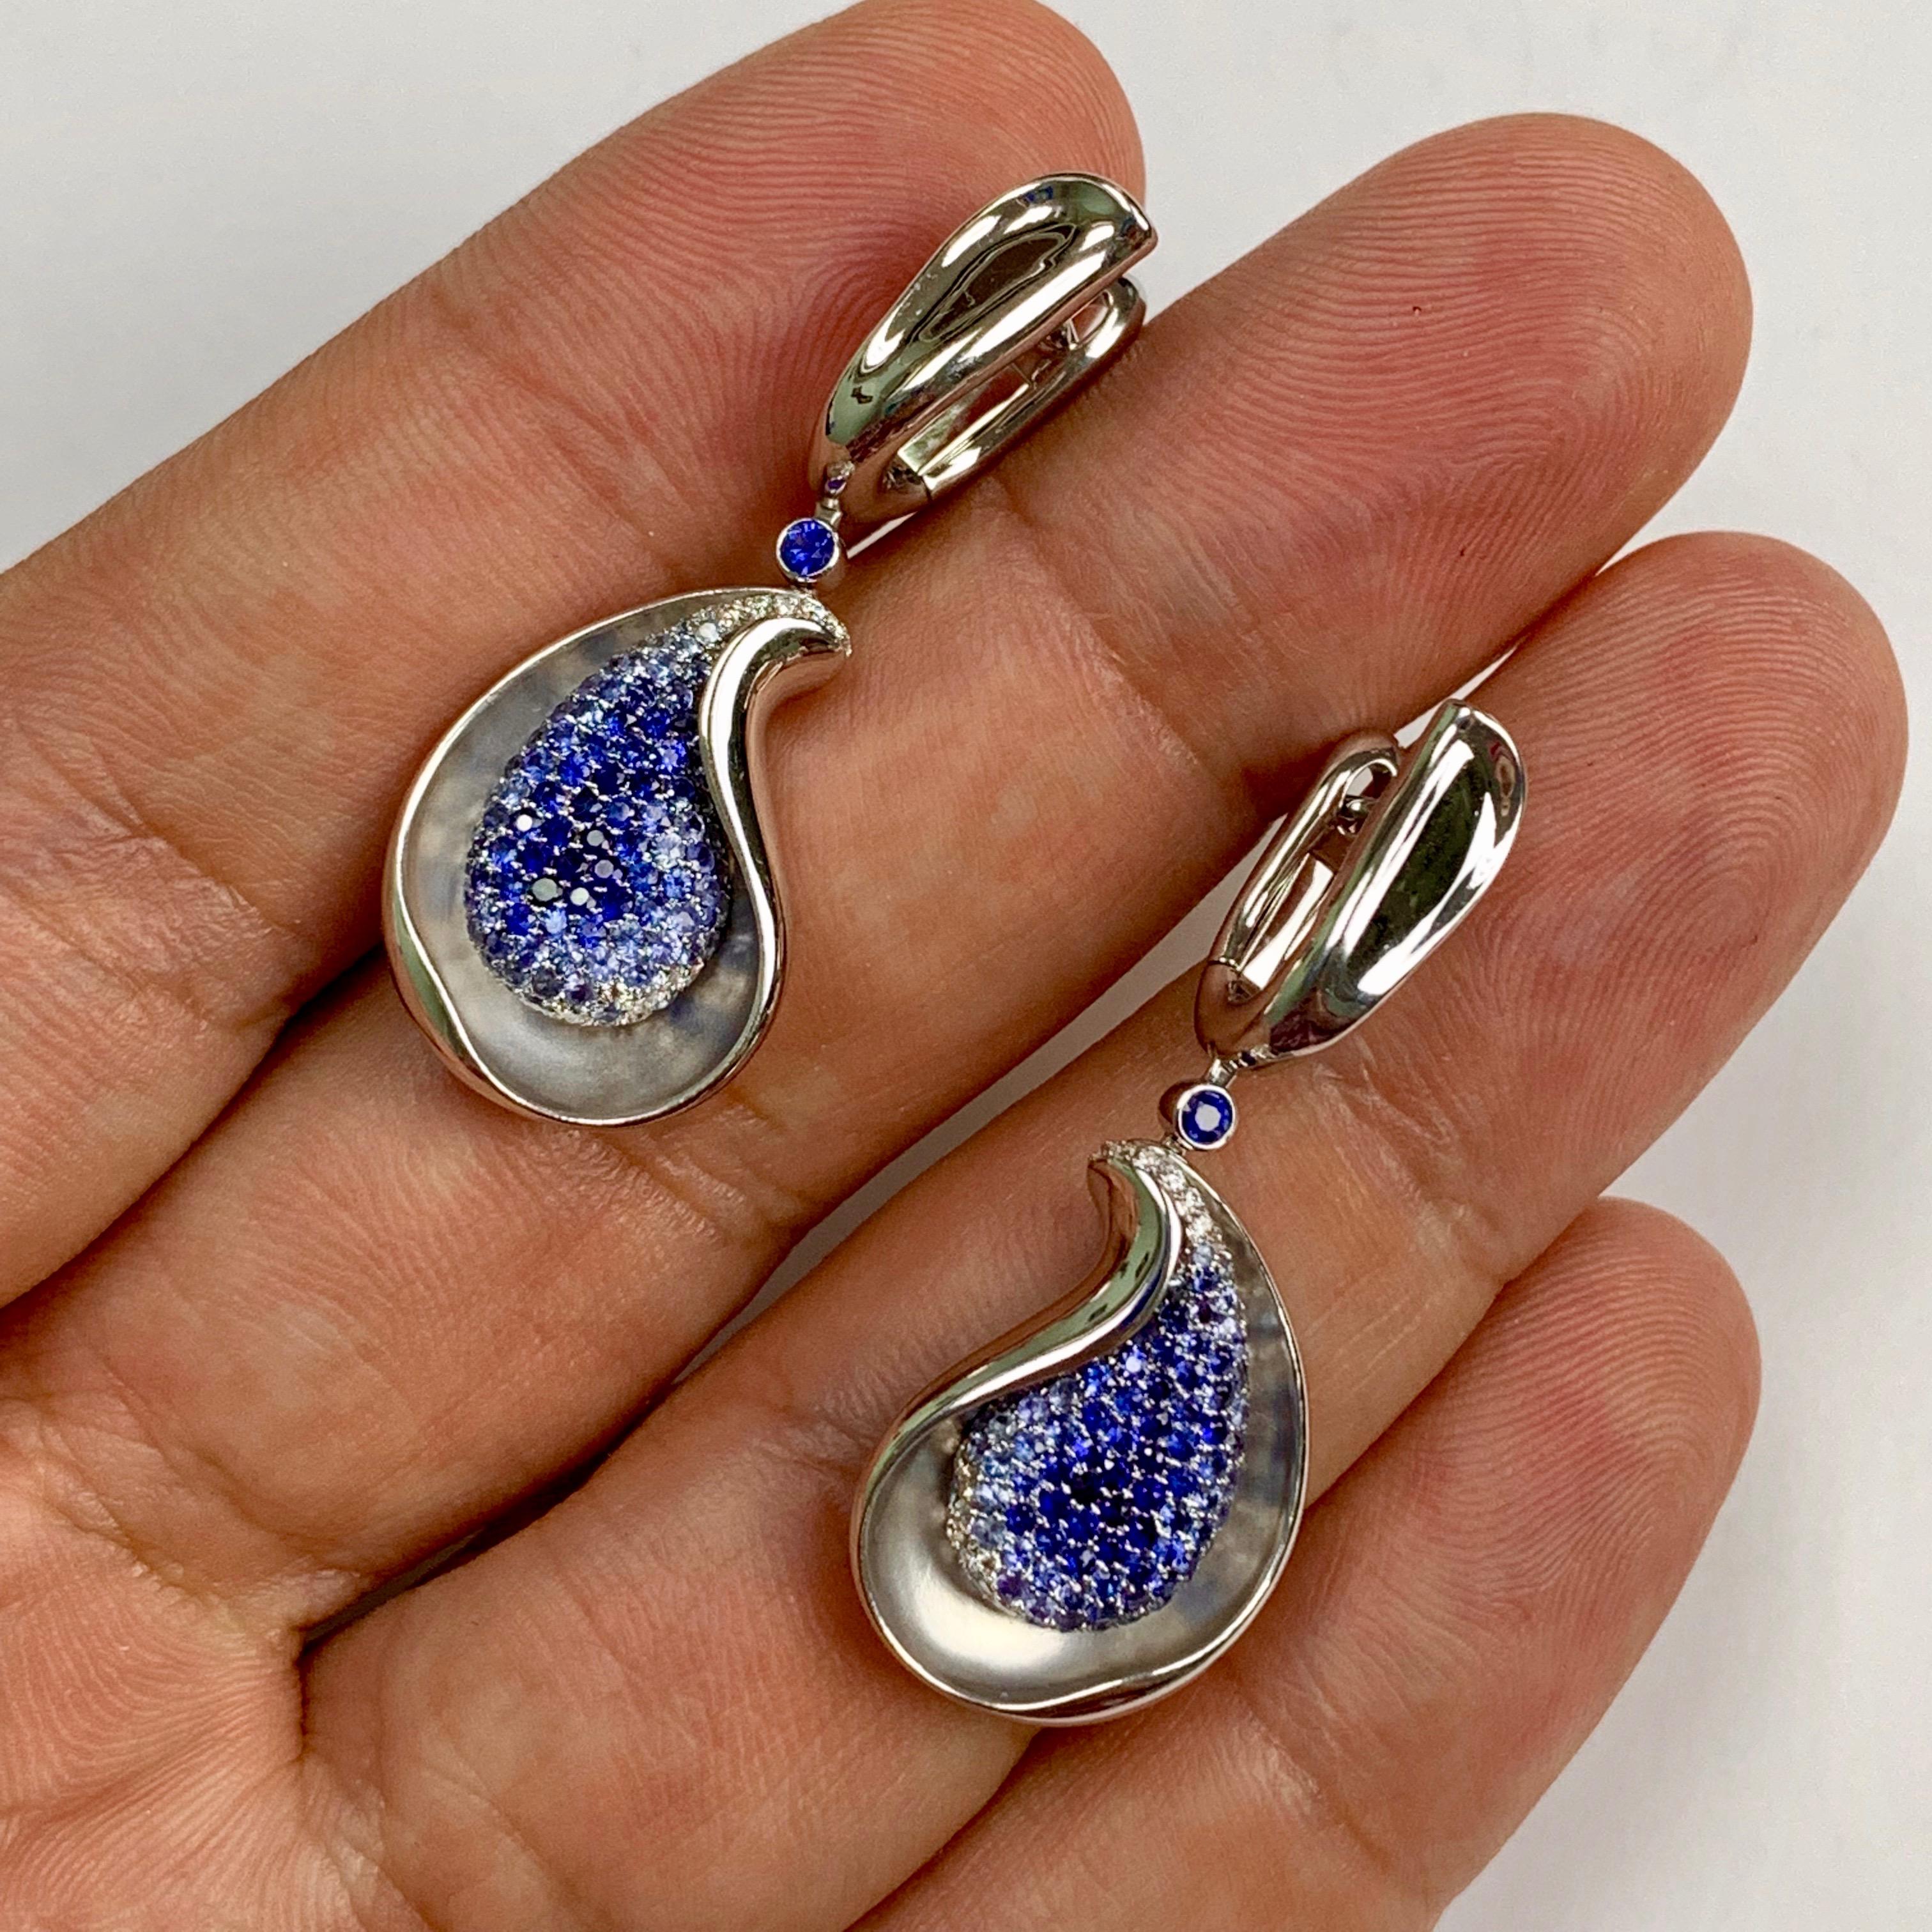 Diamond Blue Sapphire 18 Karat White Gold Earrings

Have you ever see how the Moonlight plays on Water? Our designers cath this moment in this Beautiful Earrings. The graduation of Diamonds and Blue Sapphires gives full impression of the Moonlight